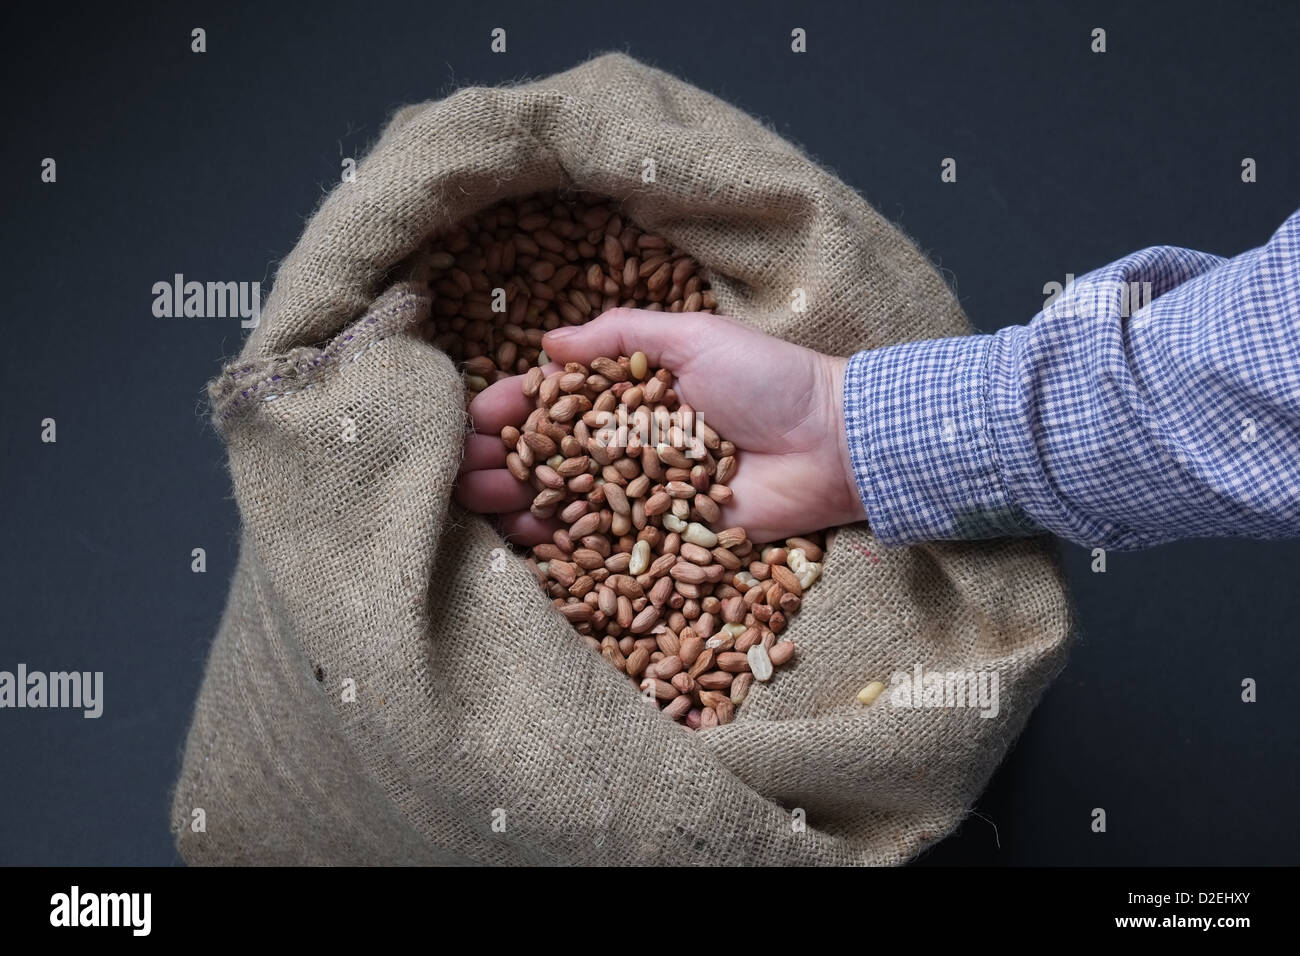 A man's hand holds peanuts in a hessian sack Stock Photo